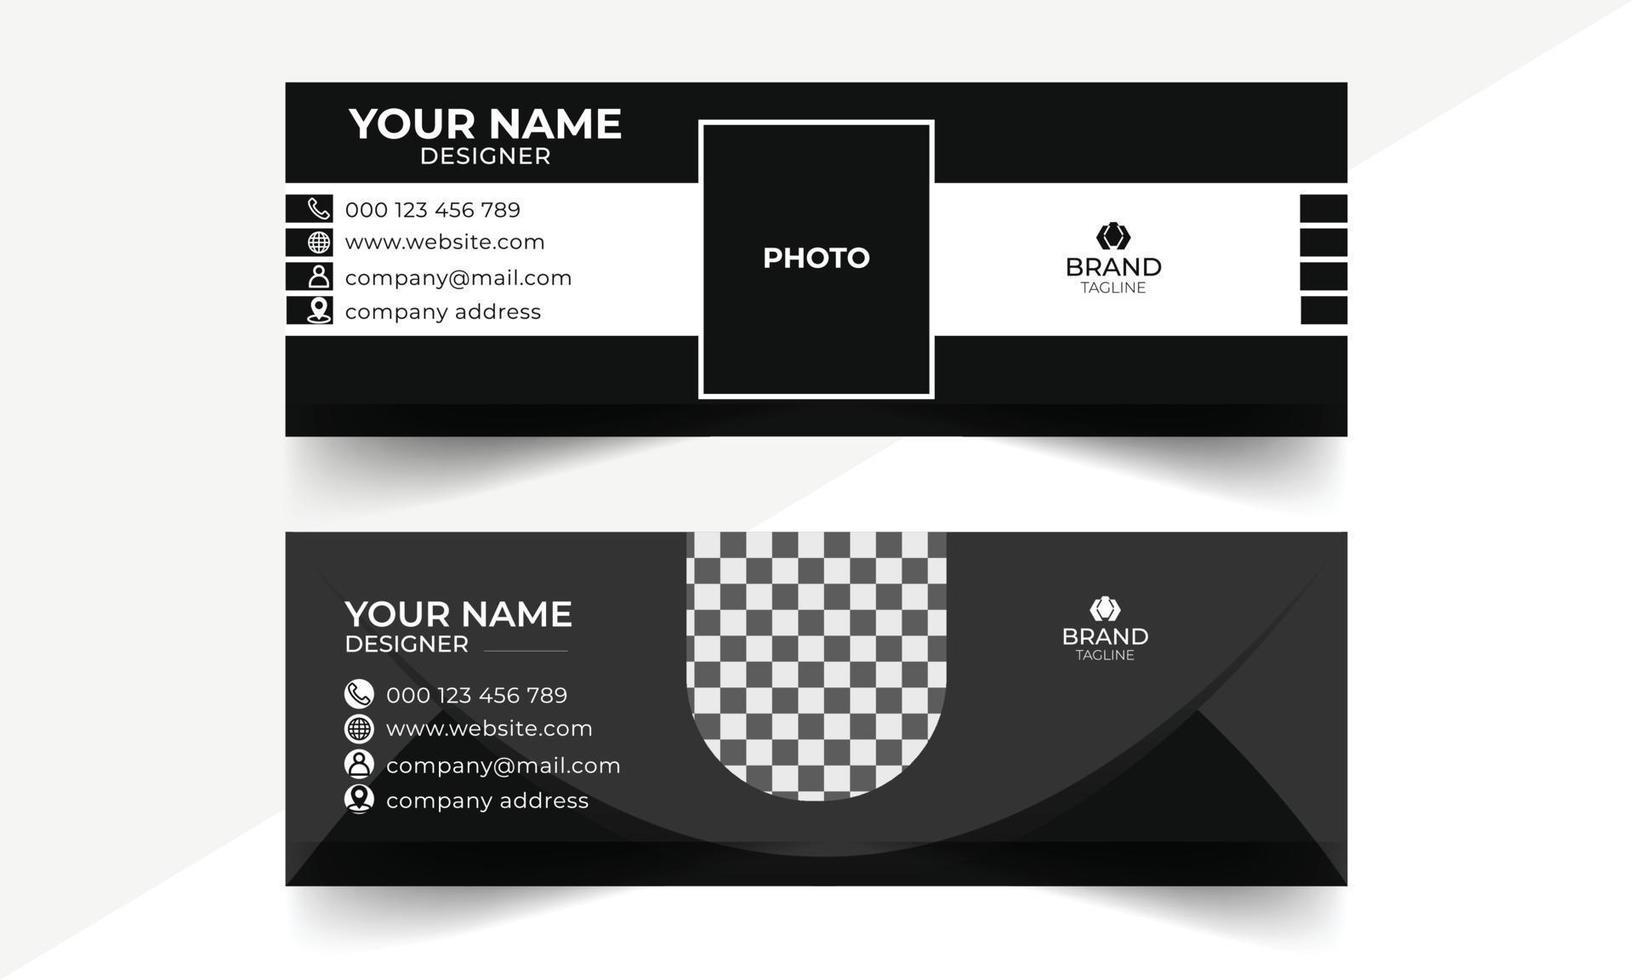 Email signature template or email footer and personal social media cover design . Email signature design and professional facebook banner template. vector